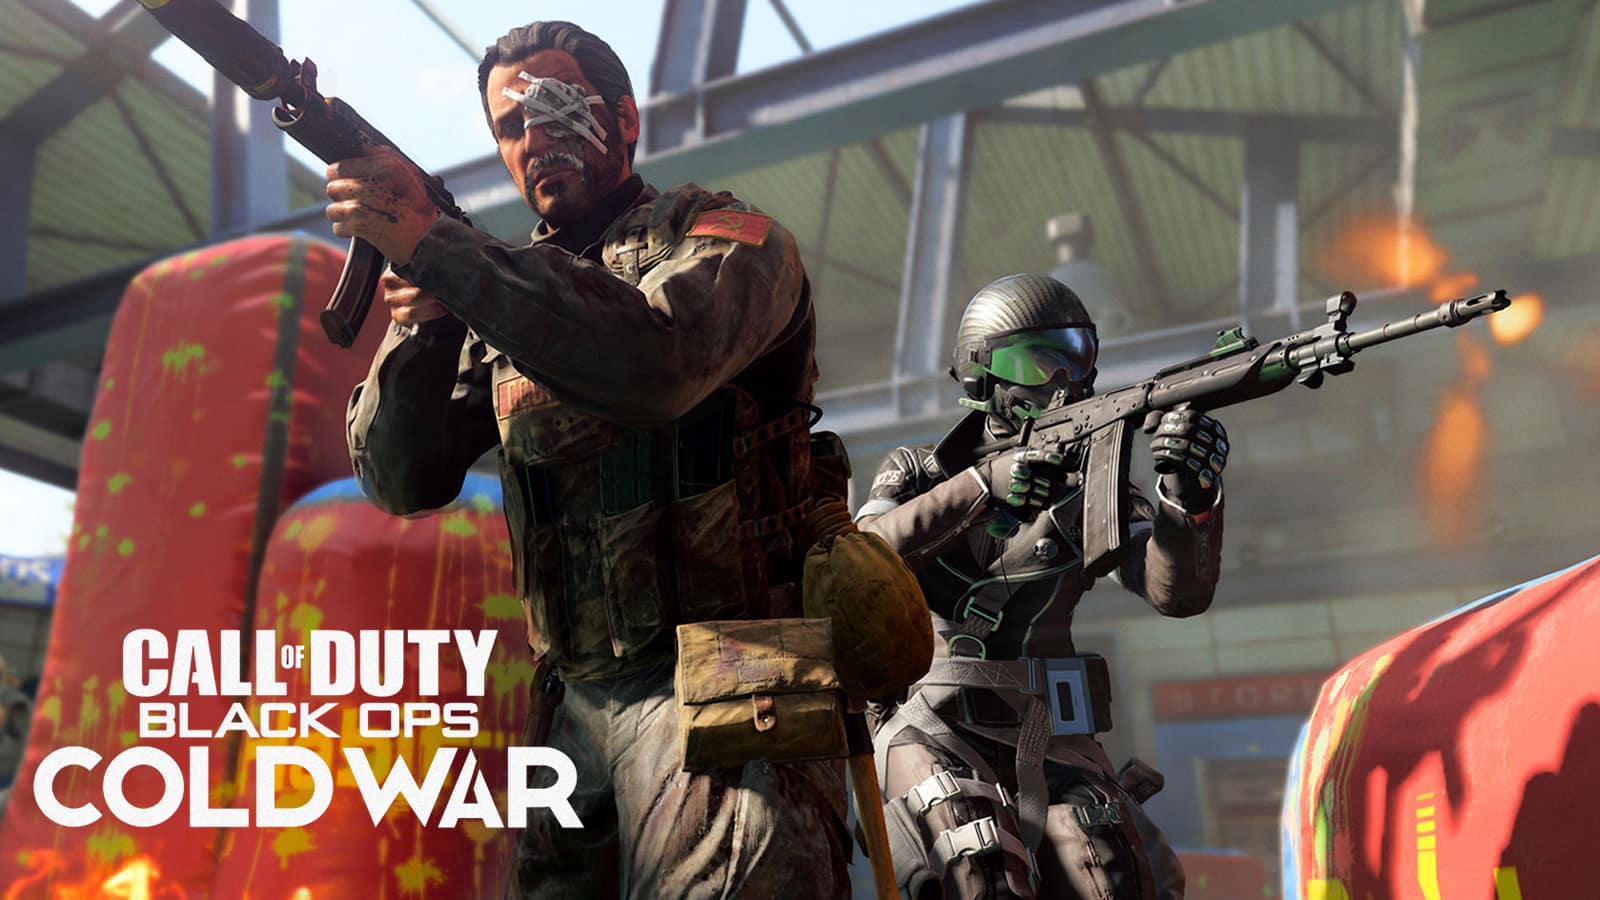 Get free loot in Call of Duty: Warzone and Black Ops Cold War – here's how